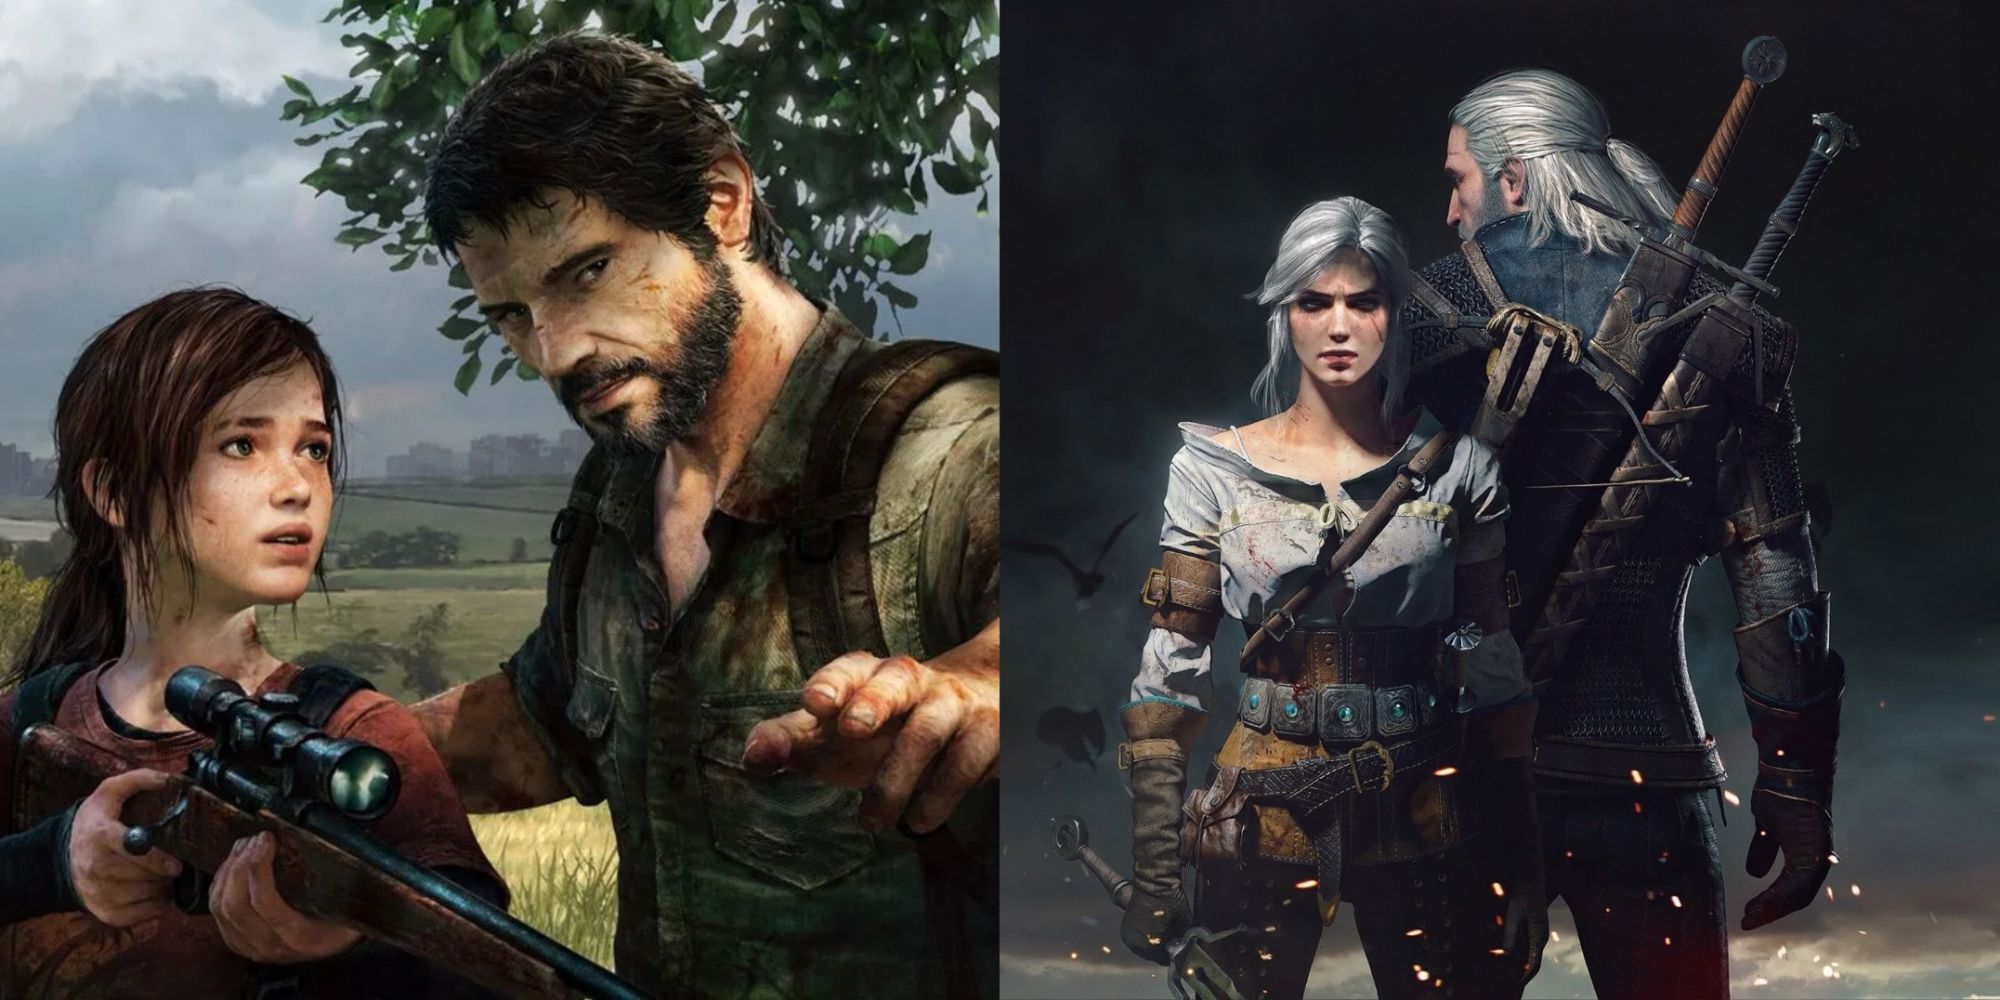 Featured Image Geralt and Joel from The Witcher and The Last of Us respectively